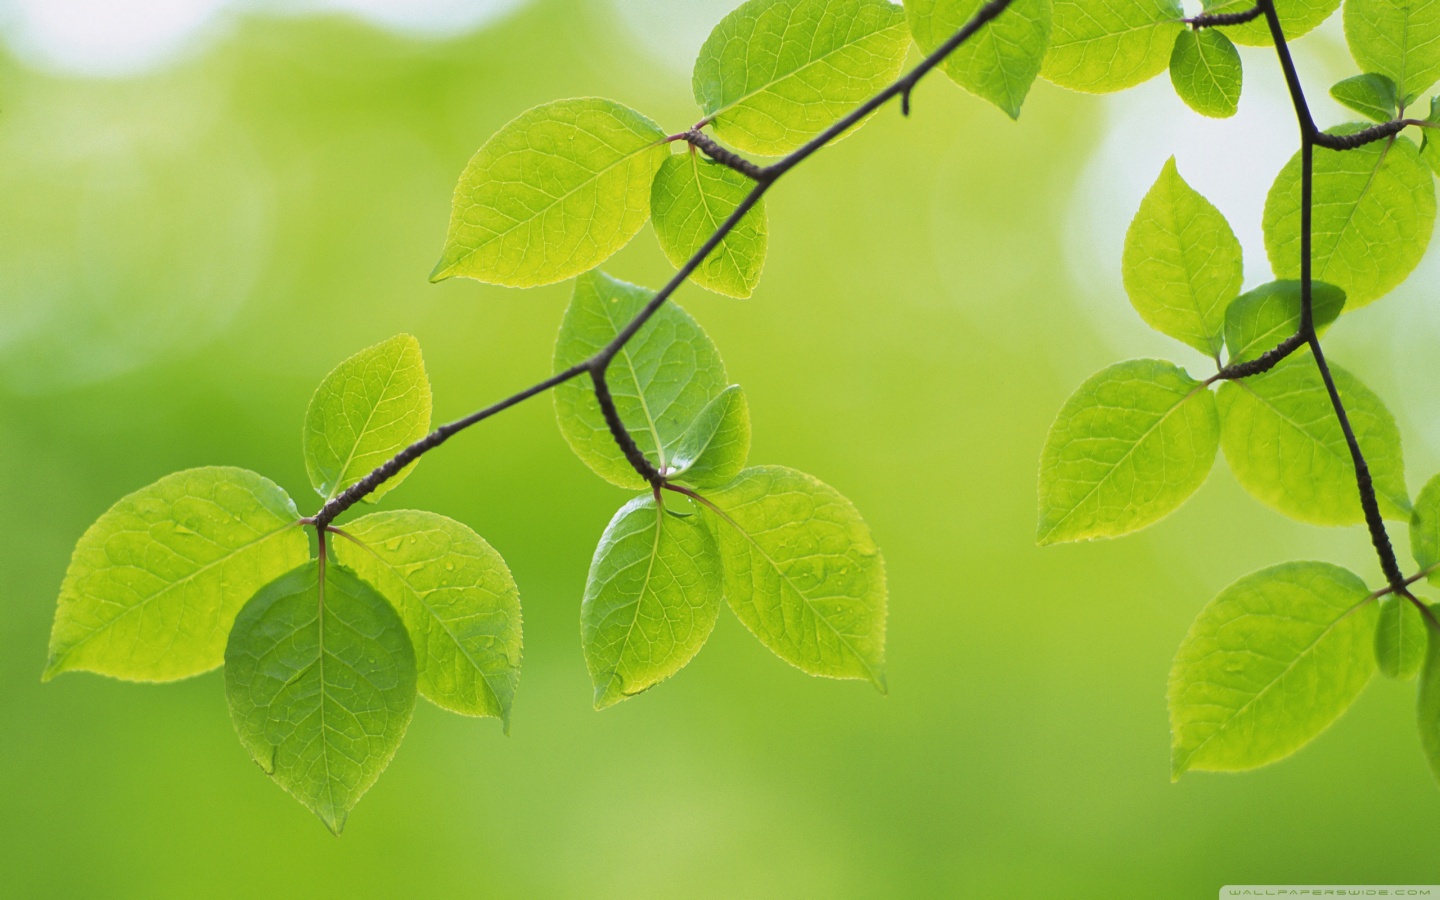 branch_with_green_leaves_26-wallpaper-1440x900.jpg